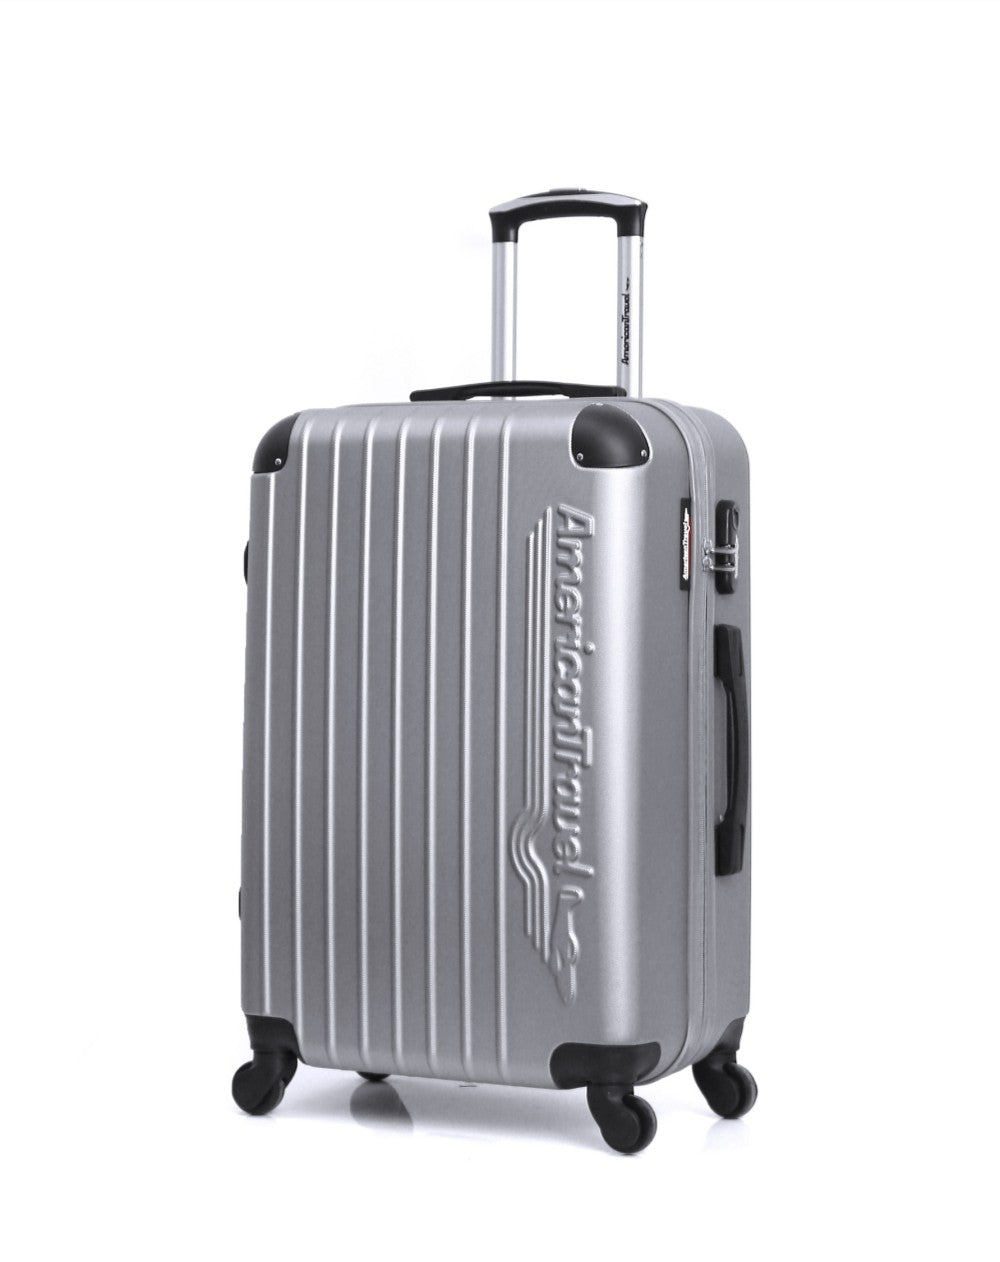 Valise Travel's Classic 54 cm Gris - 213G-55 - AS213G, 213G